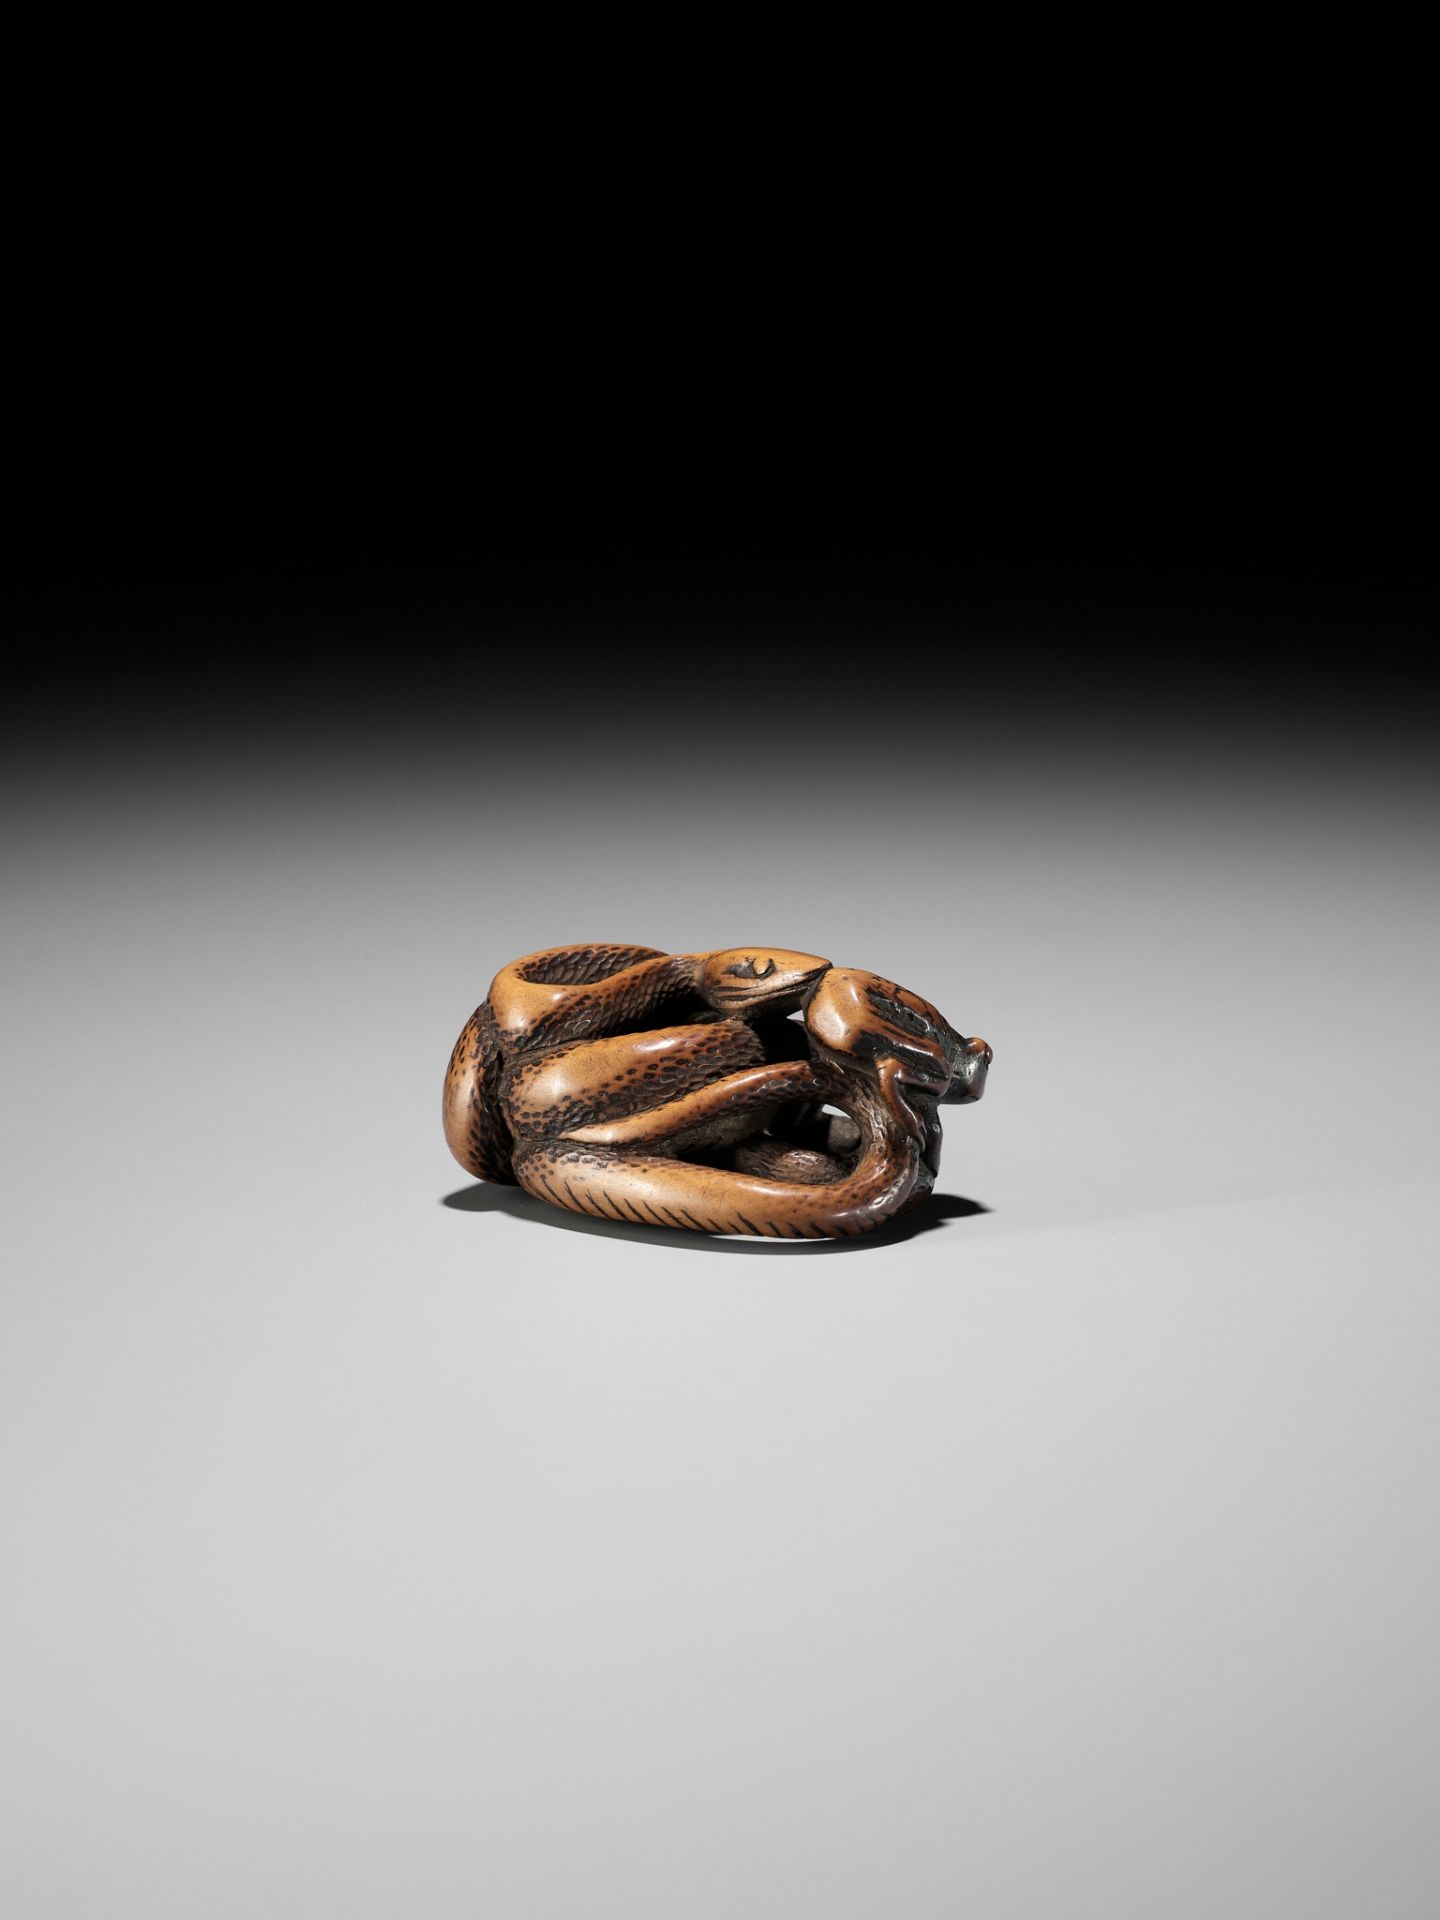 AN EARLY WOOD NETSUKE OF A SNAKE AND FROG - Image 10 of 12